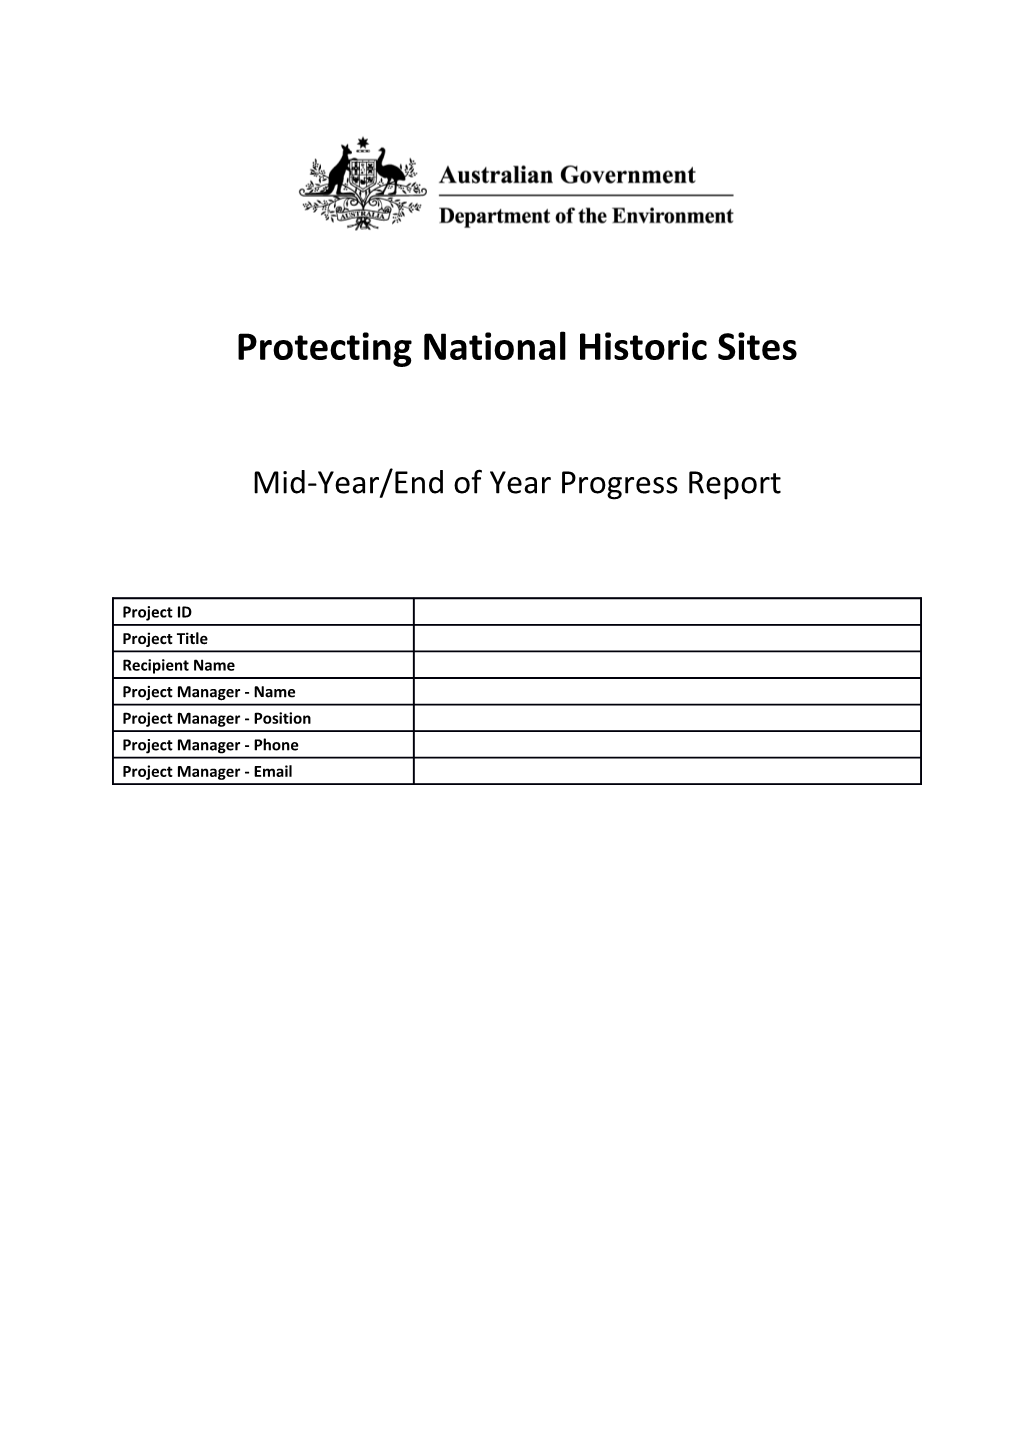 Protecting National Historic Sites - Mid Year-End of Year Progress Report